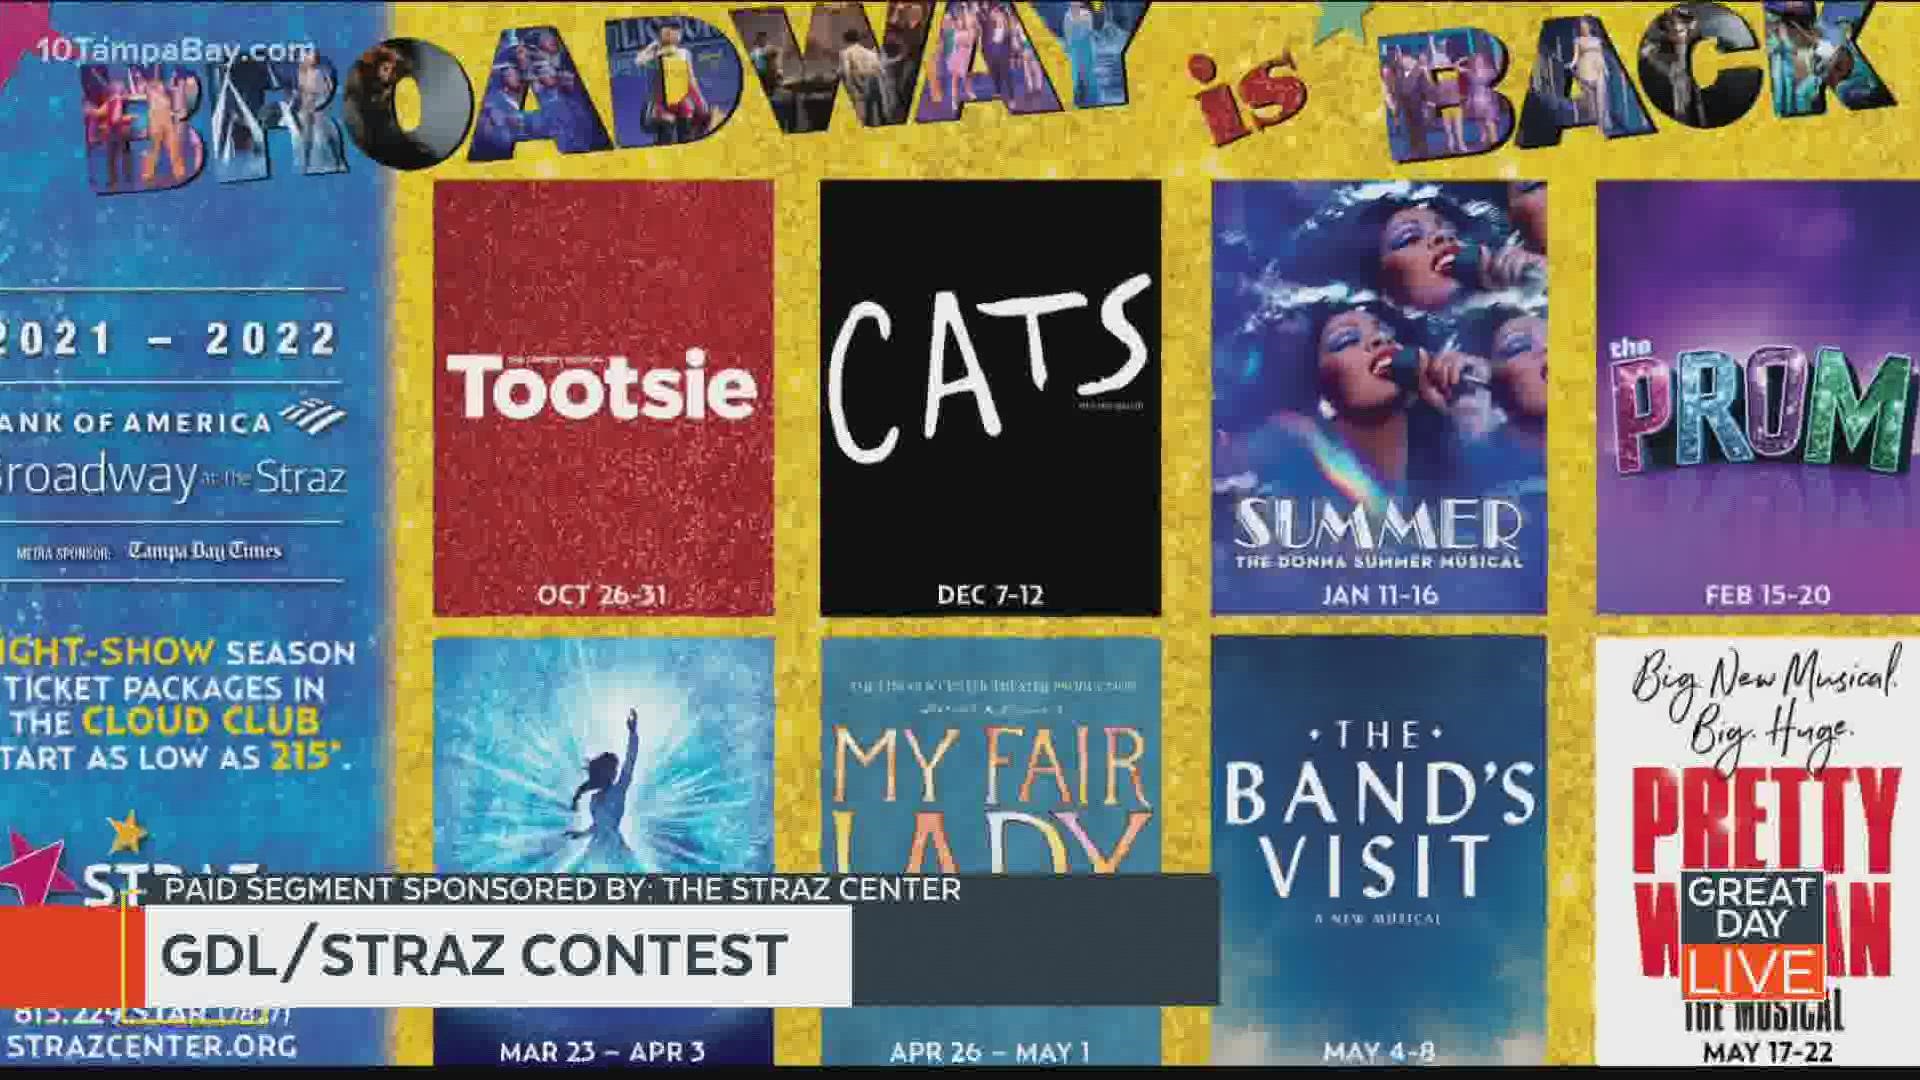 Watch GDL for your chance to win 2 tickets to Tootsie, Cats, Summer: The Donna Summer Musical, The Prom, Frozen, My Fair Lady, The Band’s Visit, and Pretty Woman!